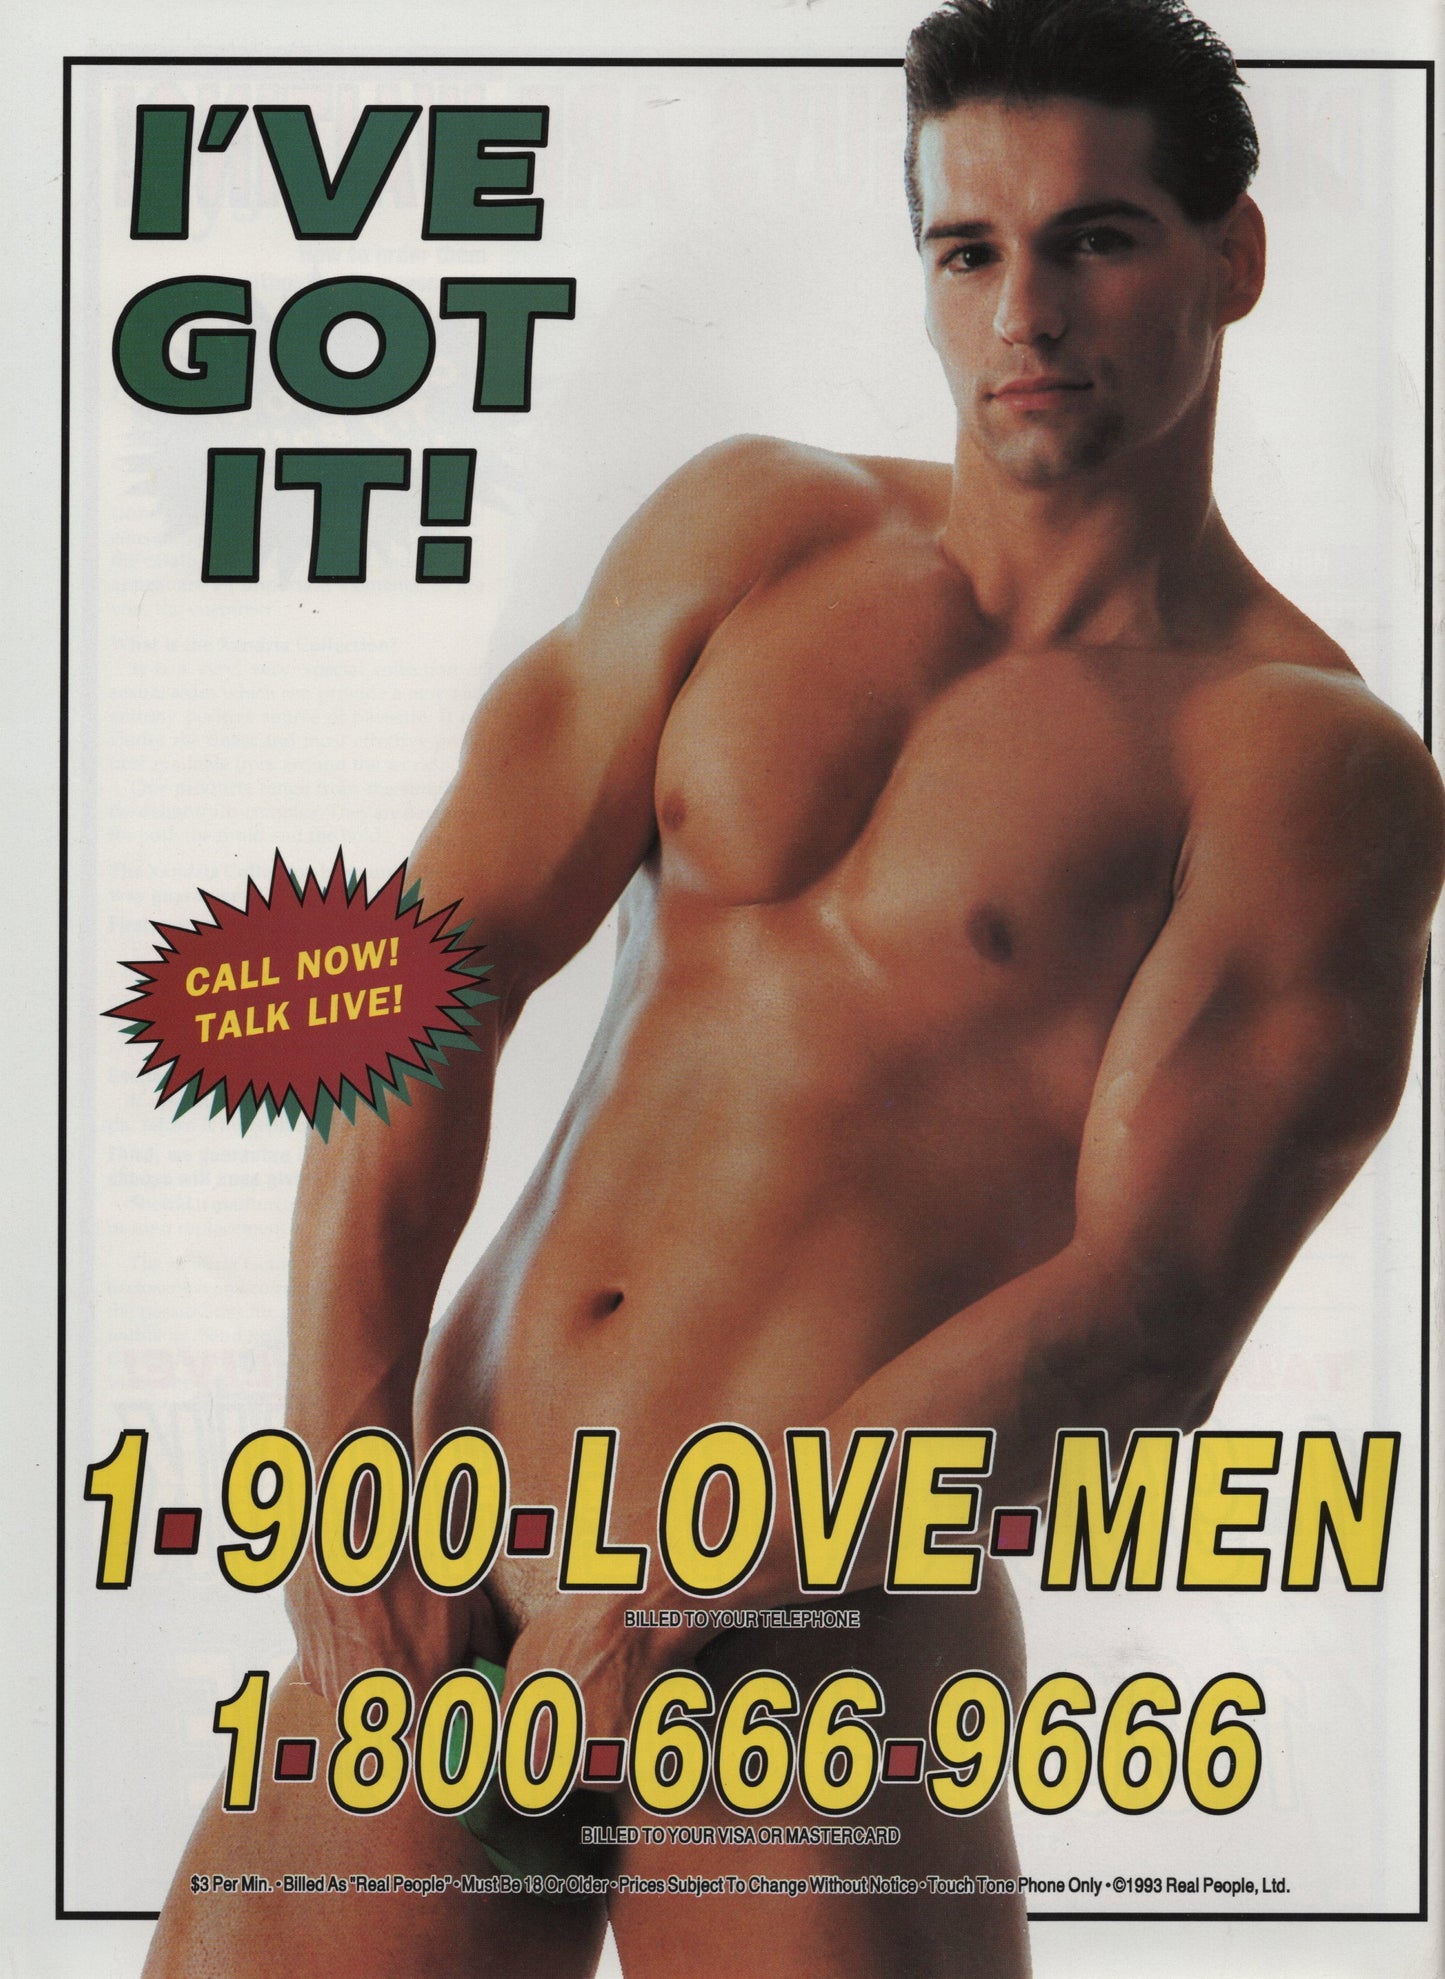 1993 February In Touch for Men Magazine Issue 191